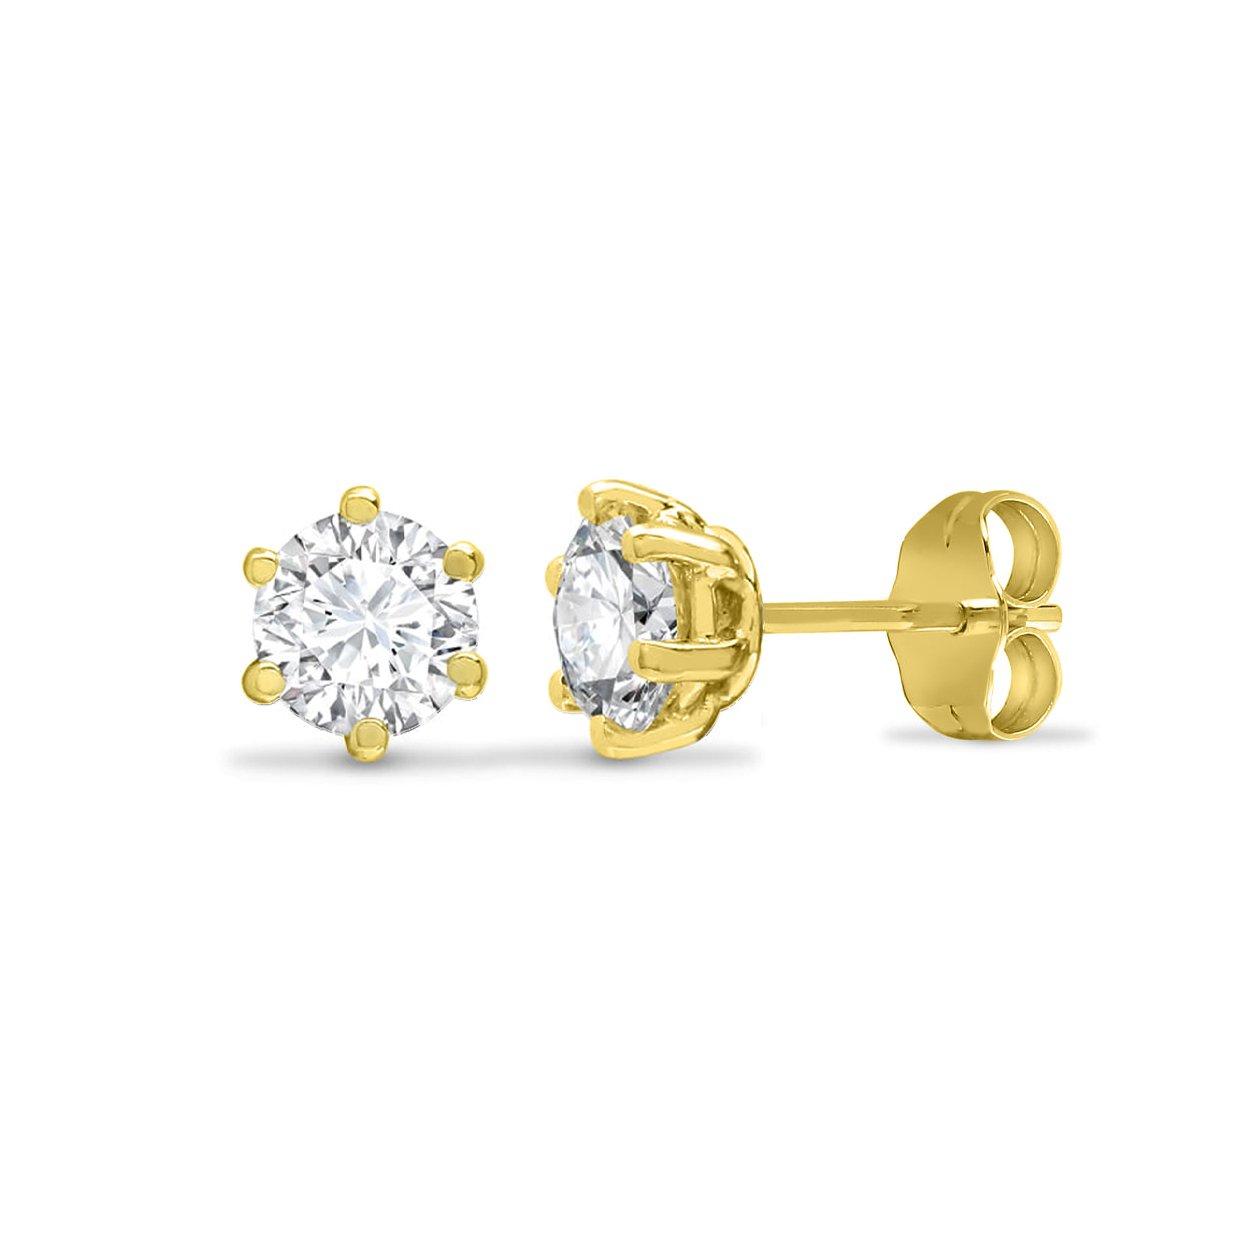 9ct Gold  CZ 6 Claw Solitaire Stud Earrings, 4mm - JES126